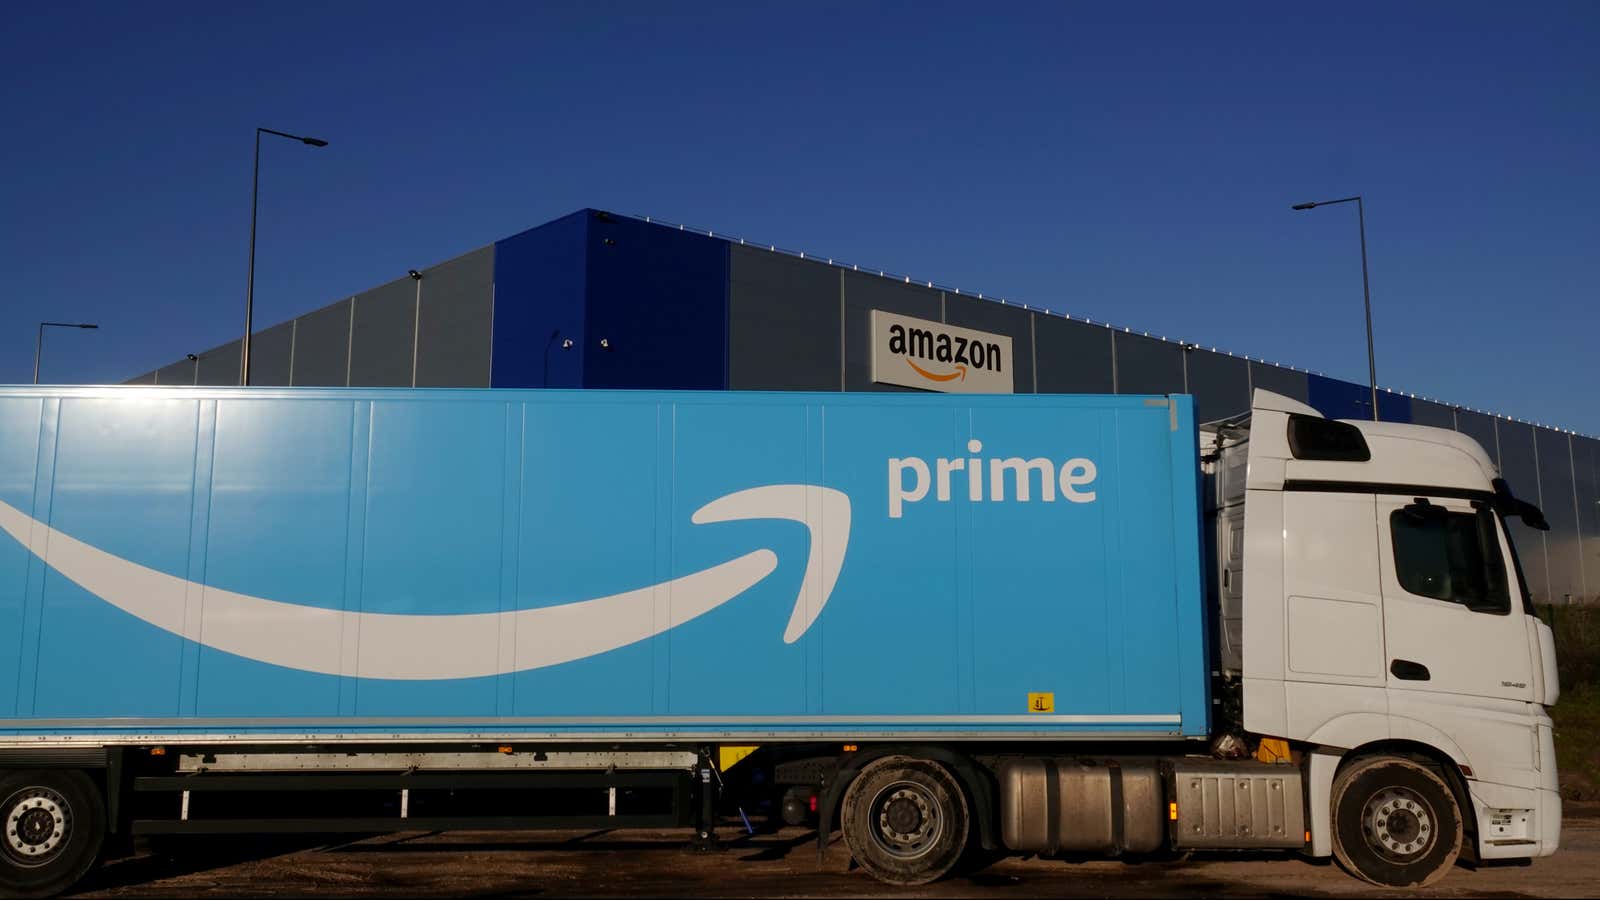 Amazon keeps signing up more Prime members, and they keep spending more on Amazon.